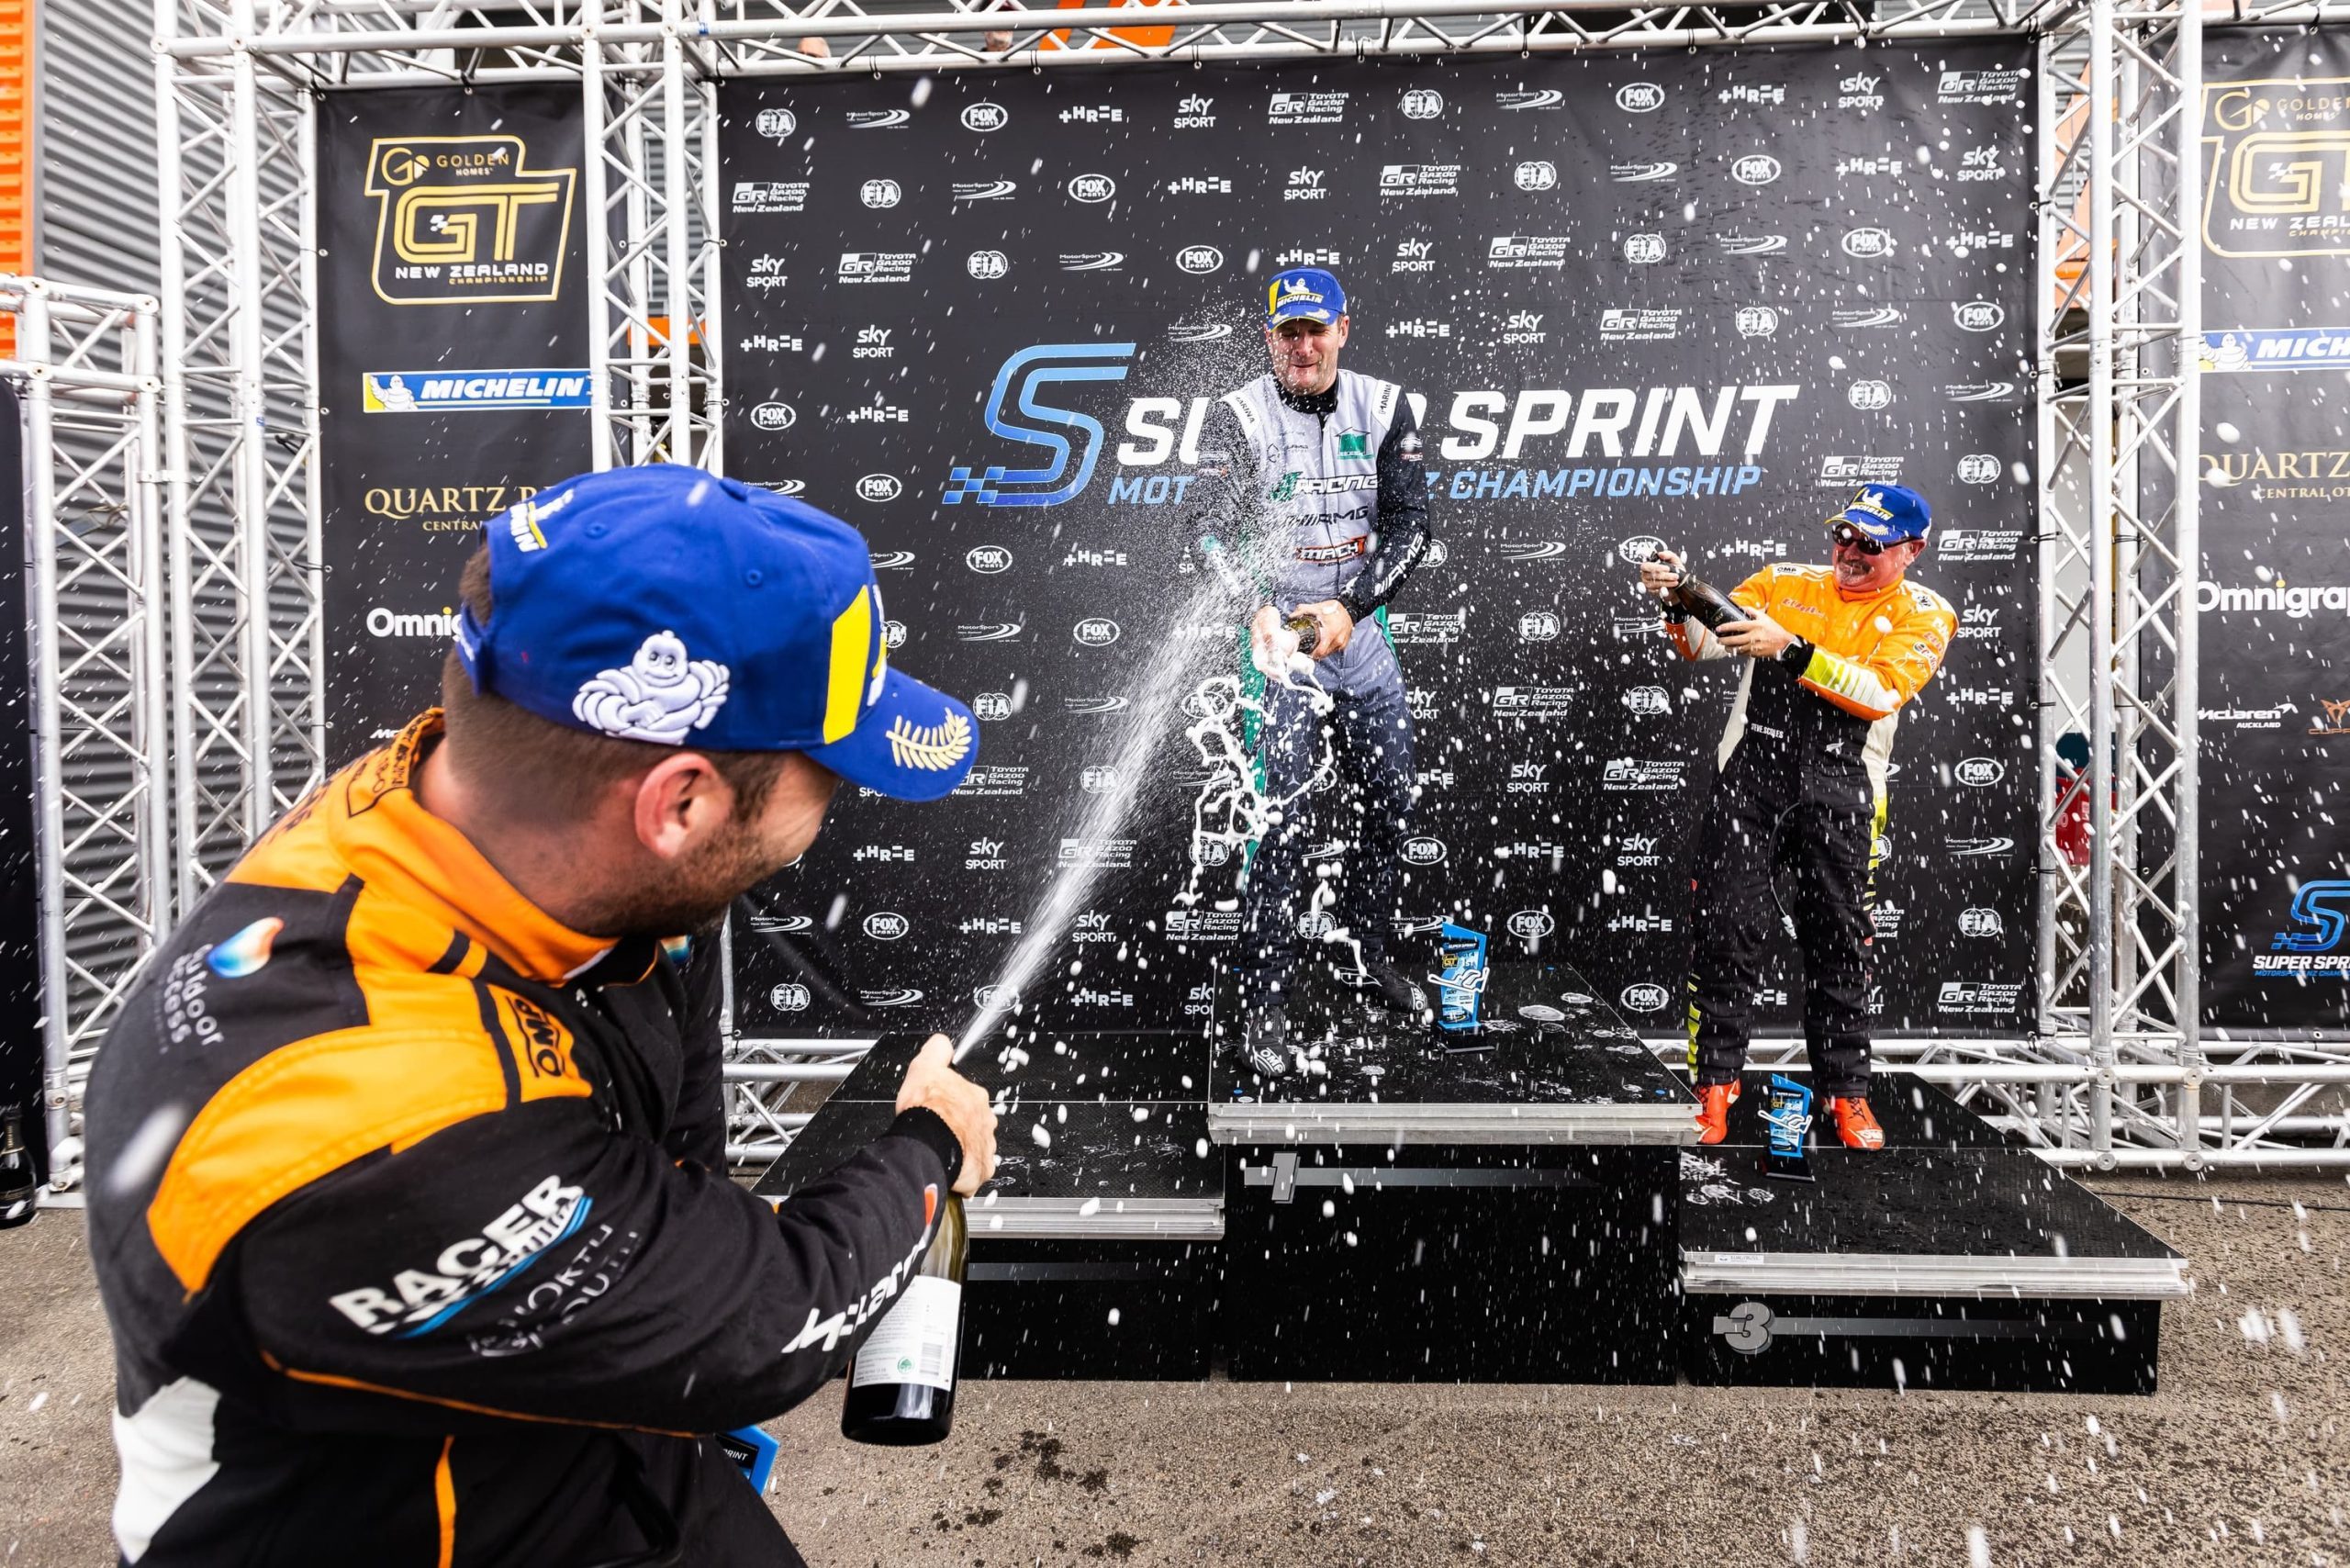 Manson and McFarlane take respective class wins in GT New Zealand ...